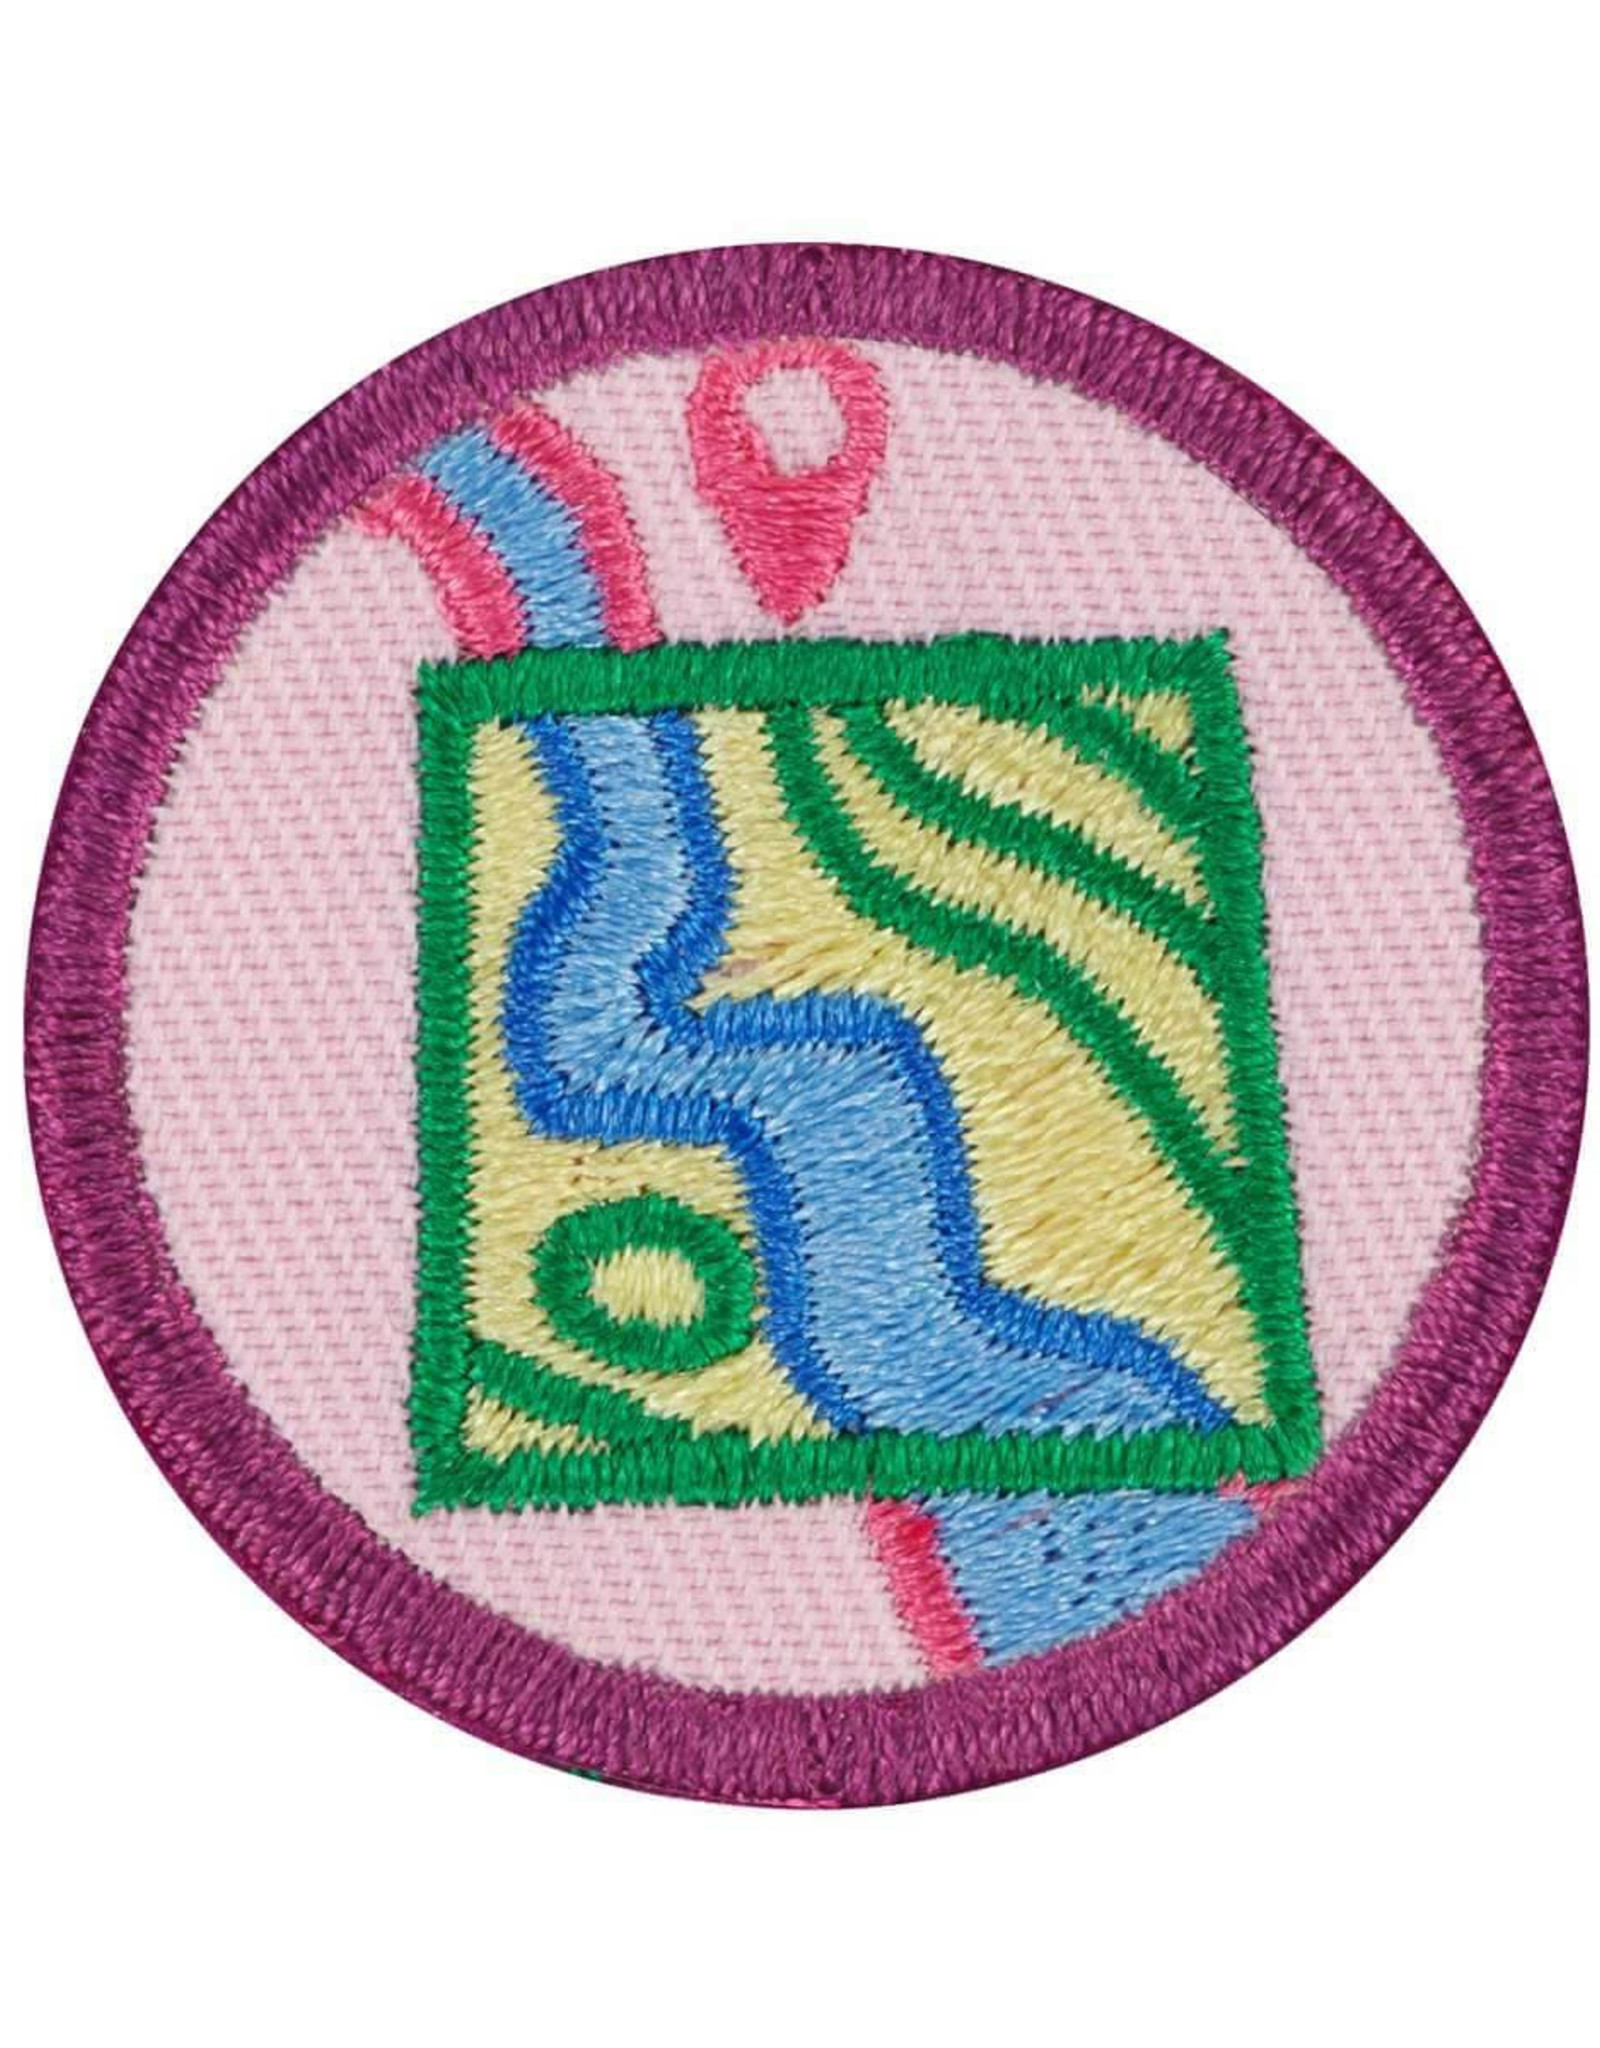 GIRL SCOUTS OF THE USA Junior Design With Nature Badge